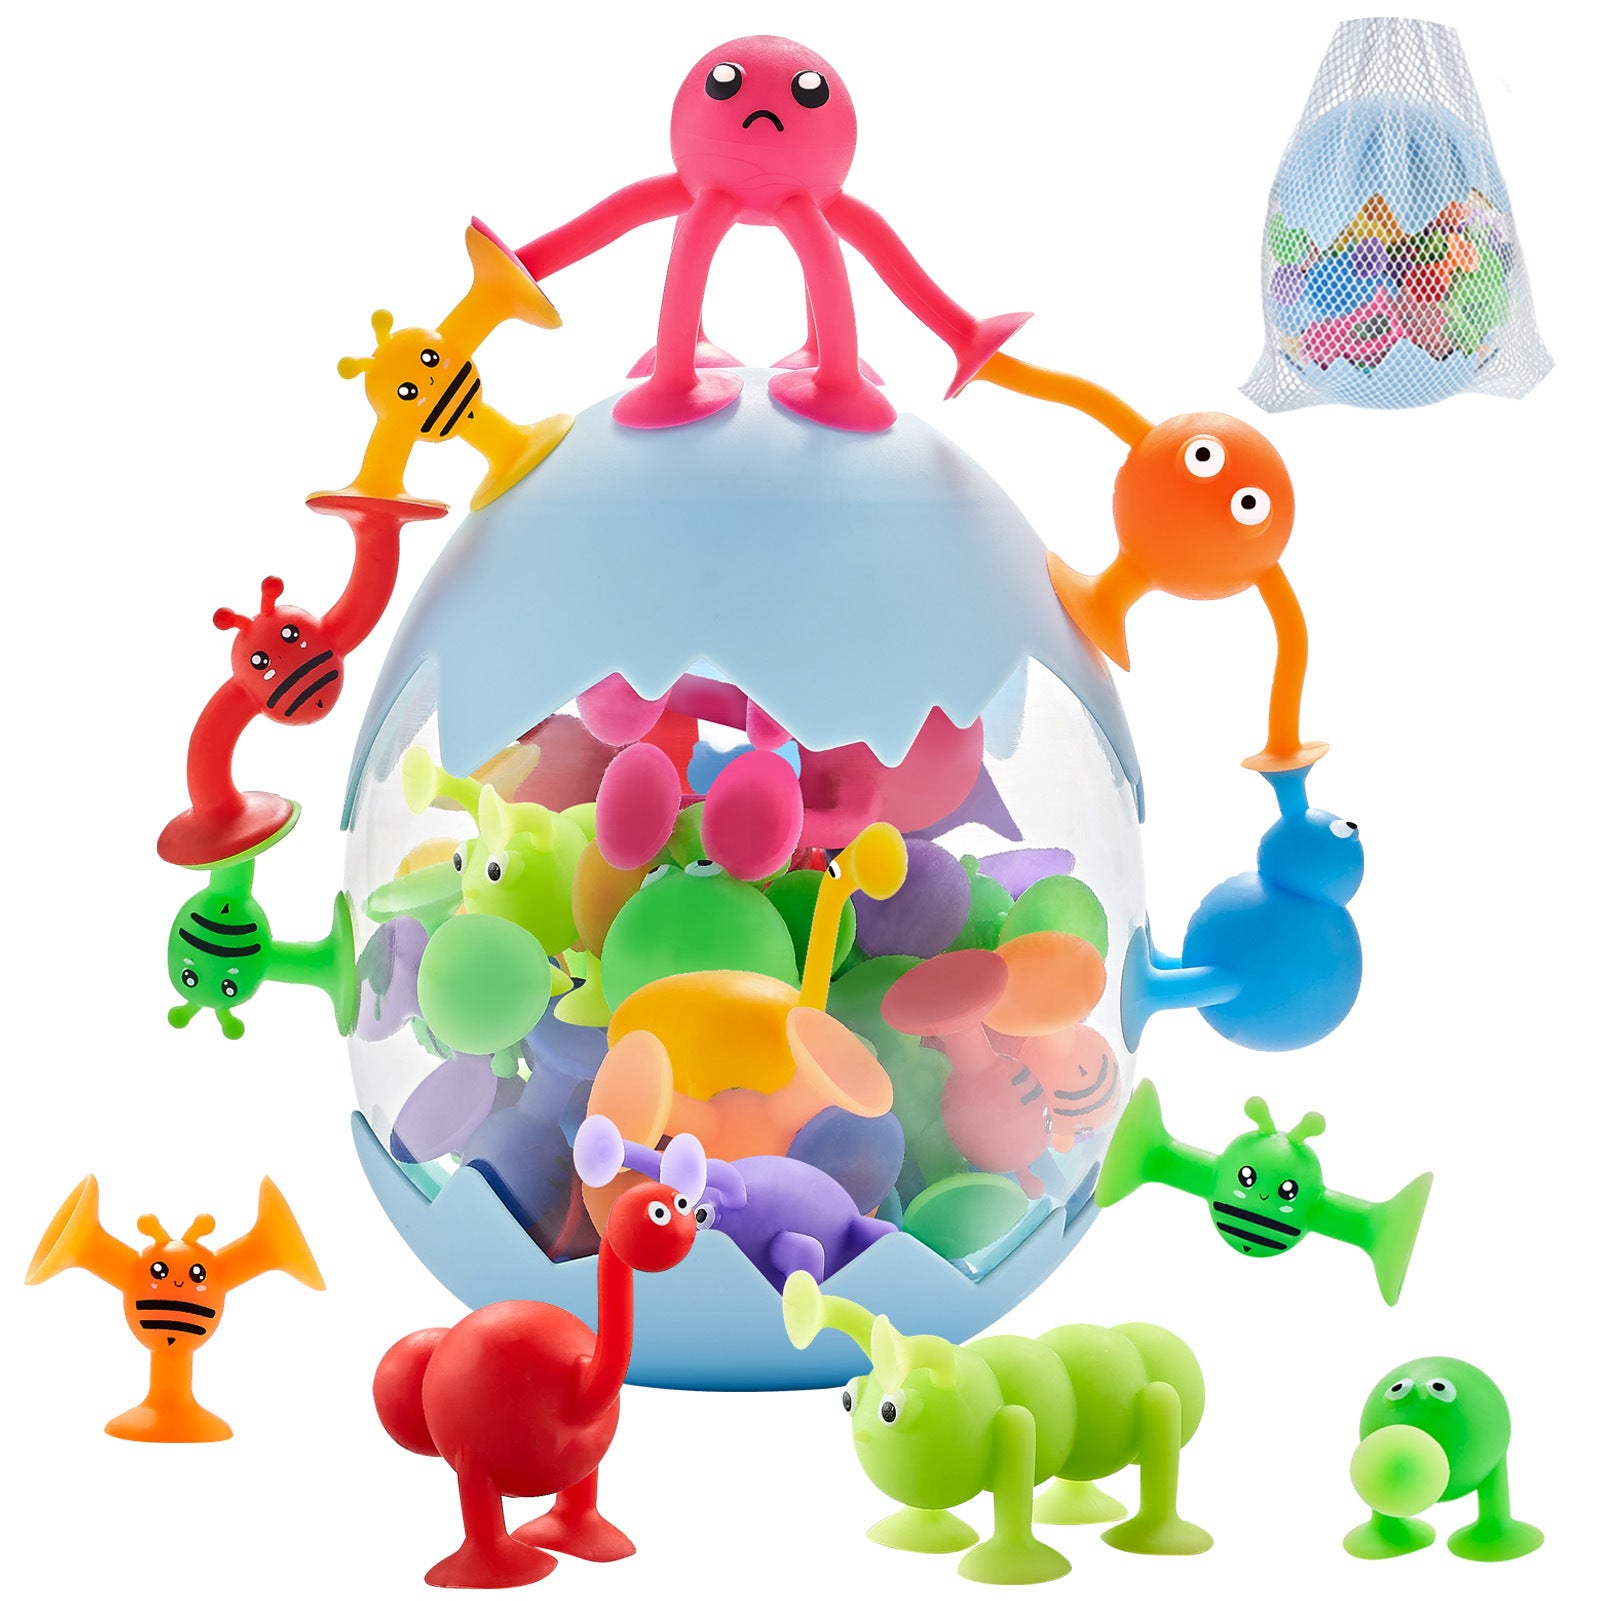 Suction Toys For Baby; Bath Toys For Kids Ages 4-8; 40pcs Toddler Stress Release Sensory Toys; Silicone Suction Cup Animal With Dinosaur Eggshell Storage; Educational Gift For Boys Girls Age 3+